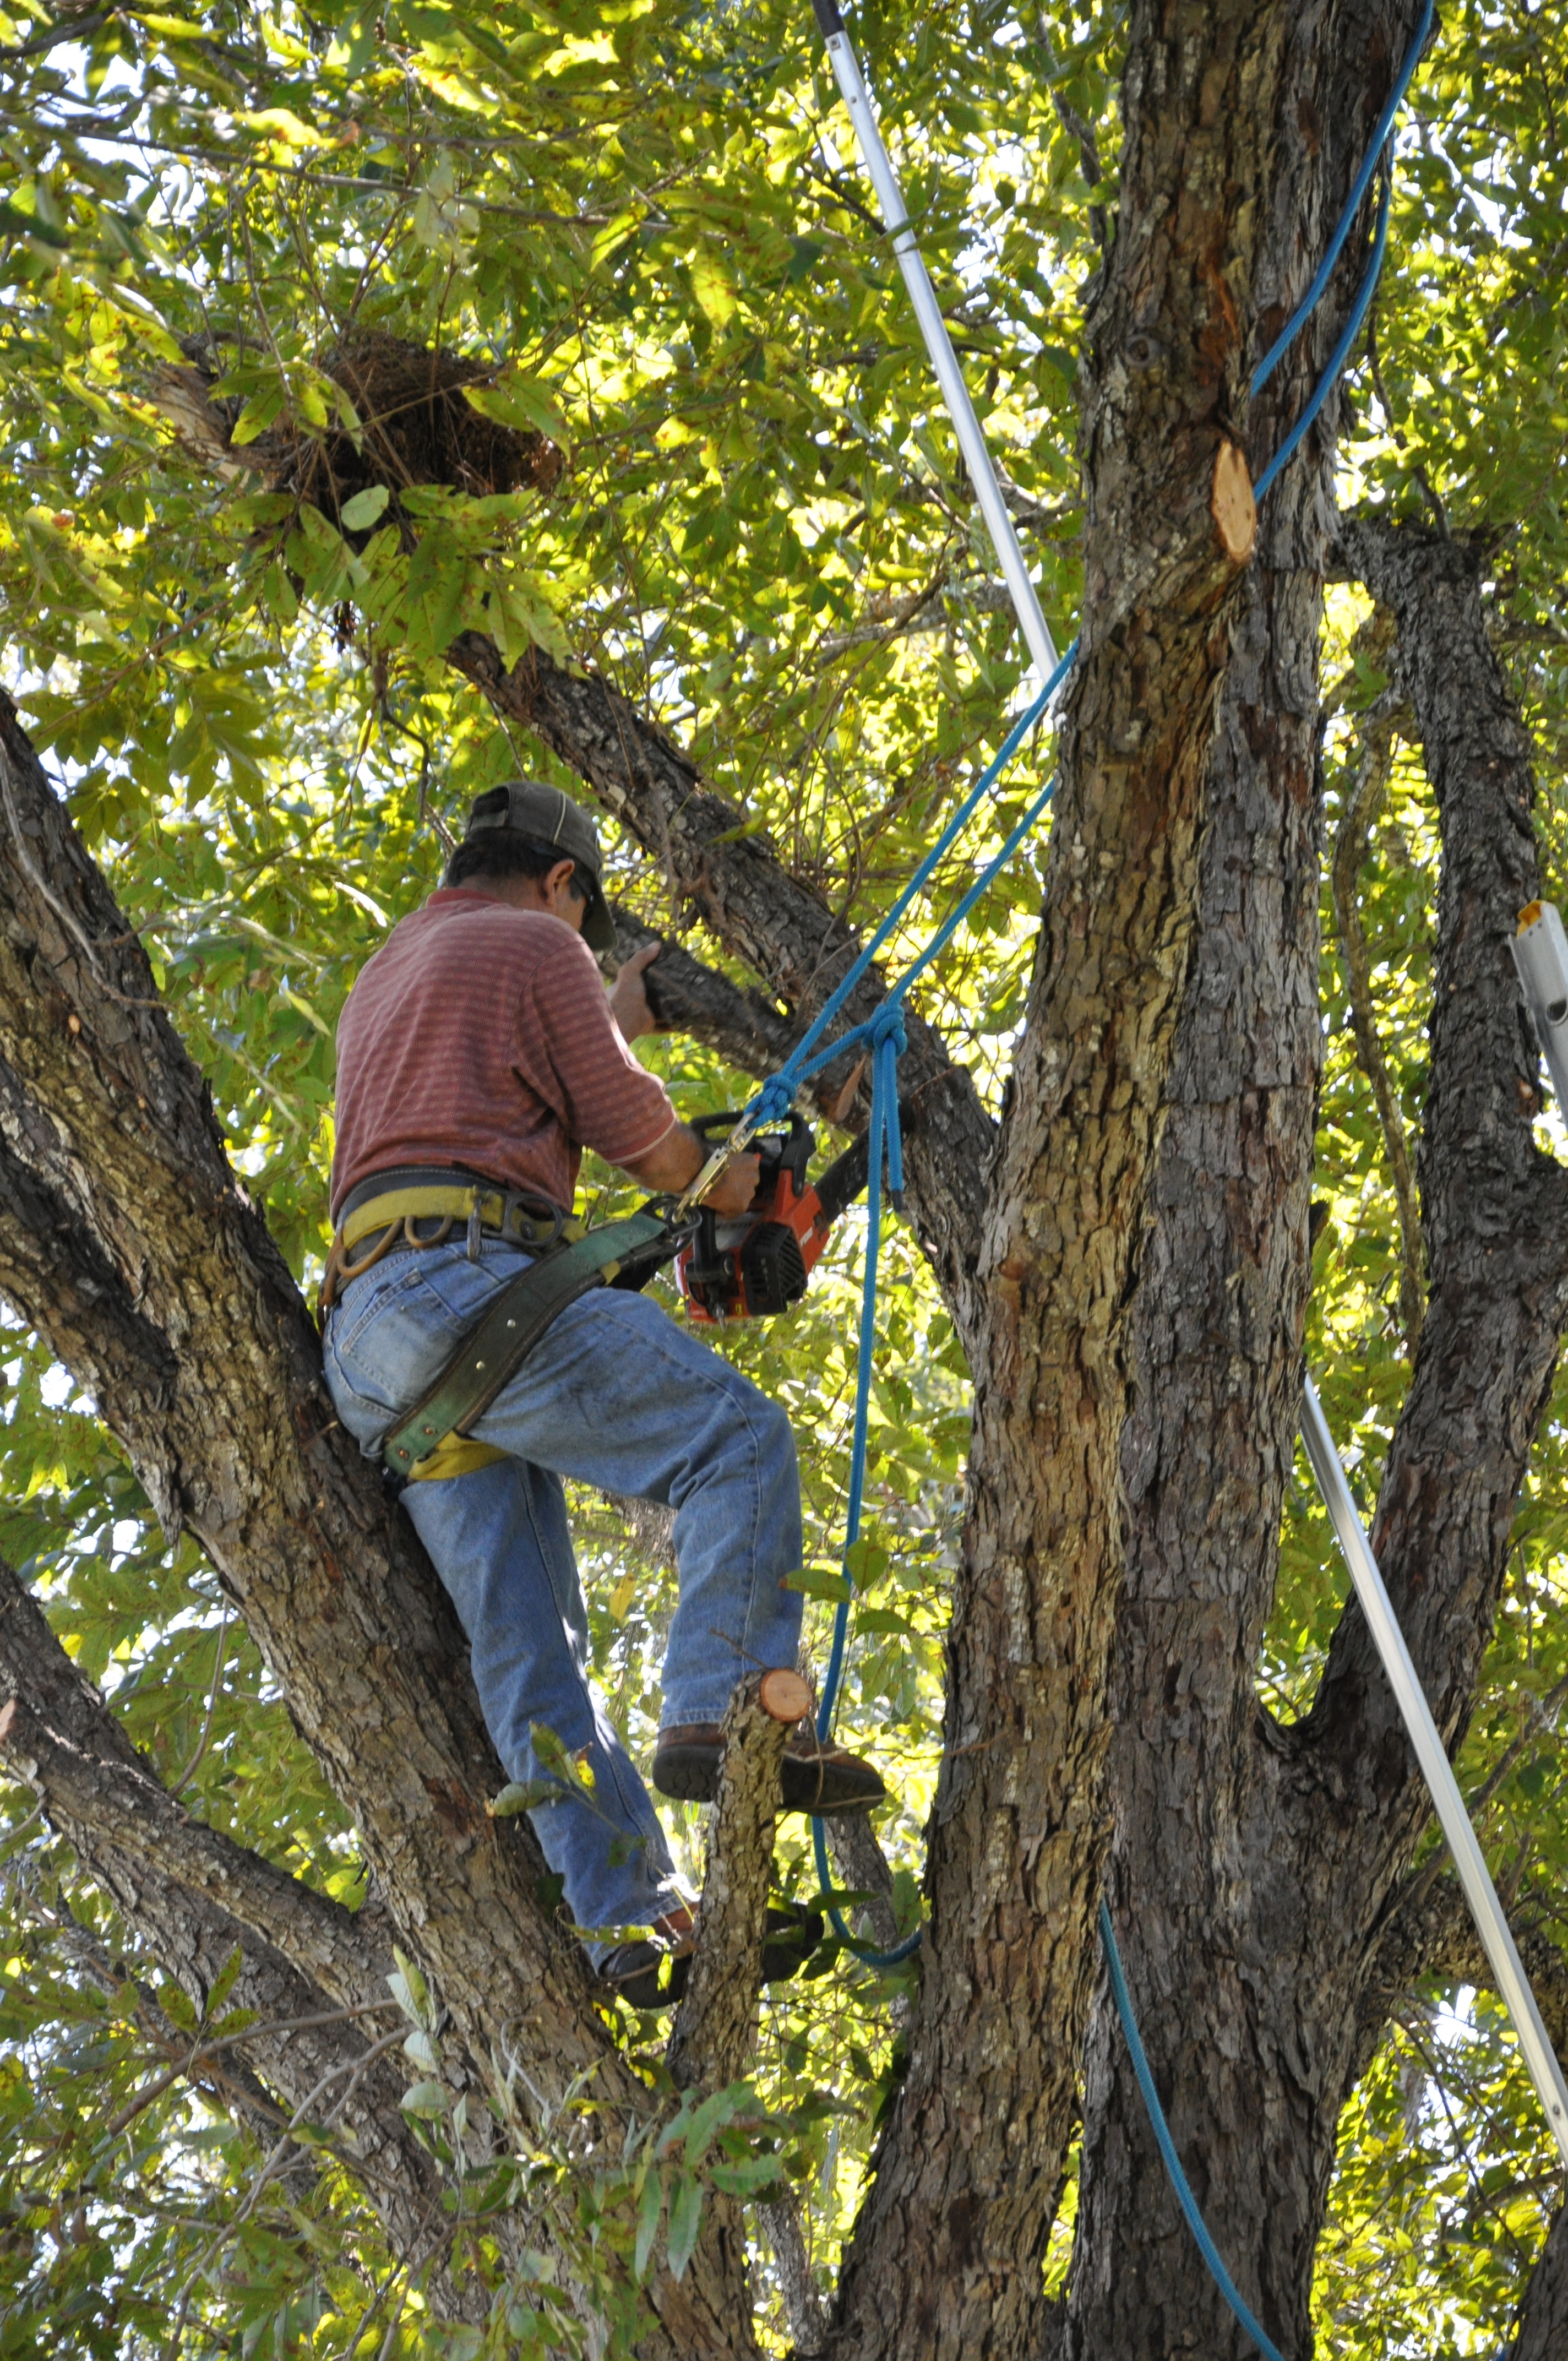 Canopy Tree Service - Providing Affordable Tree Removal And Tree